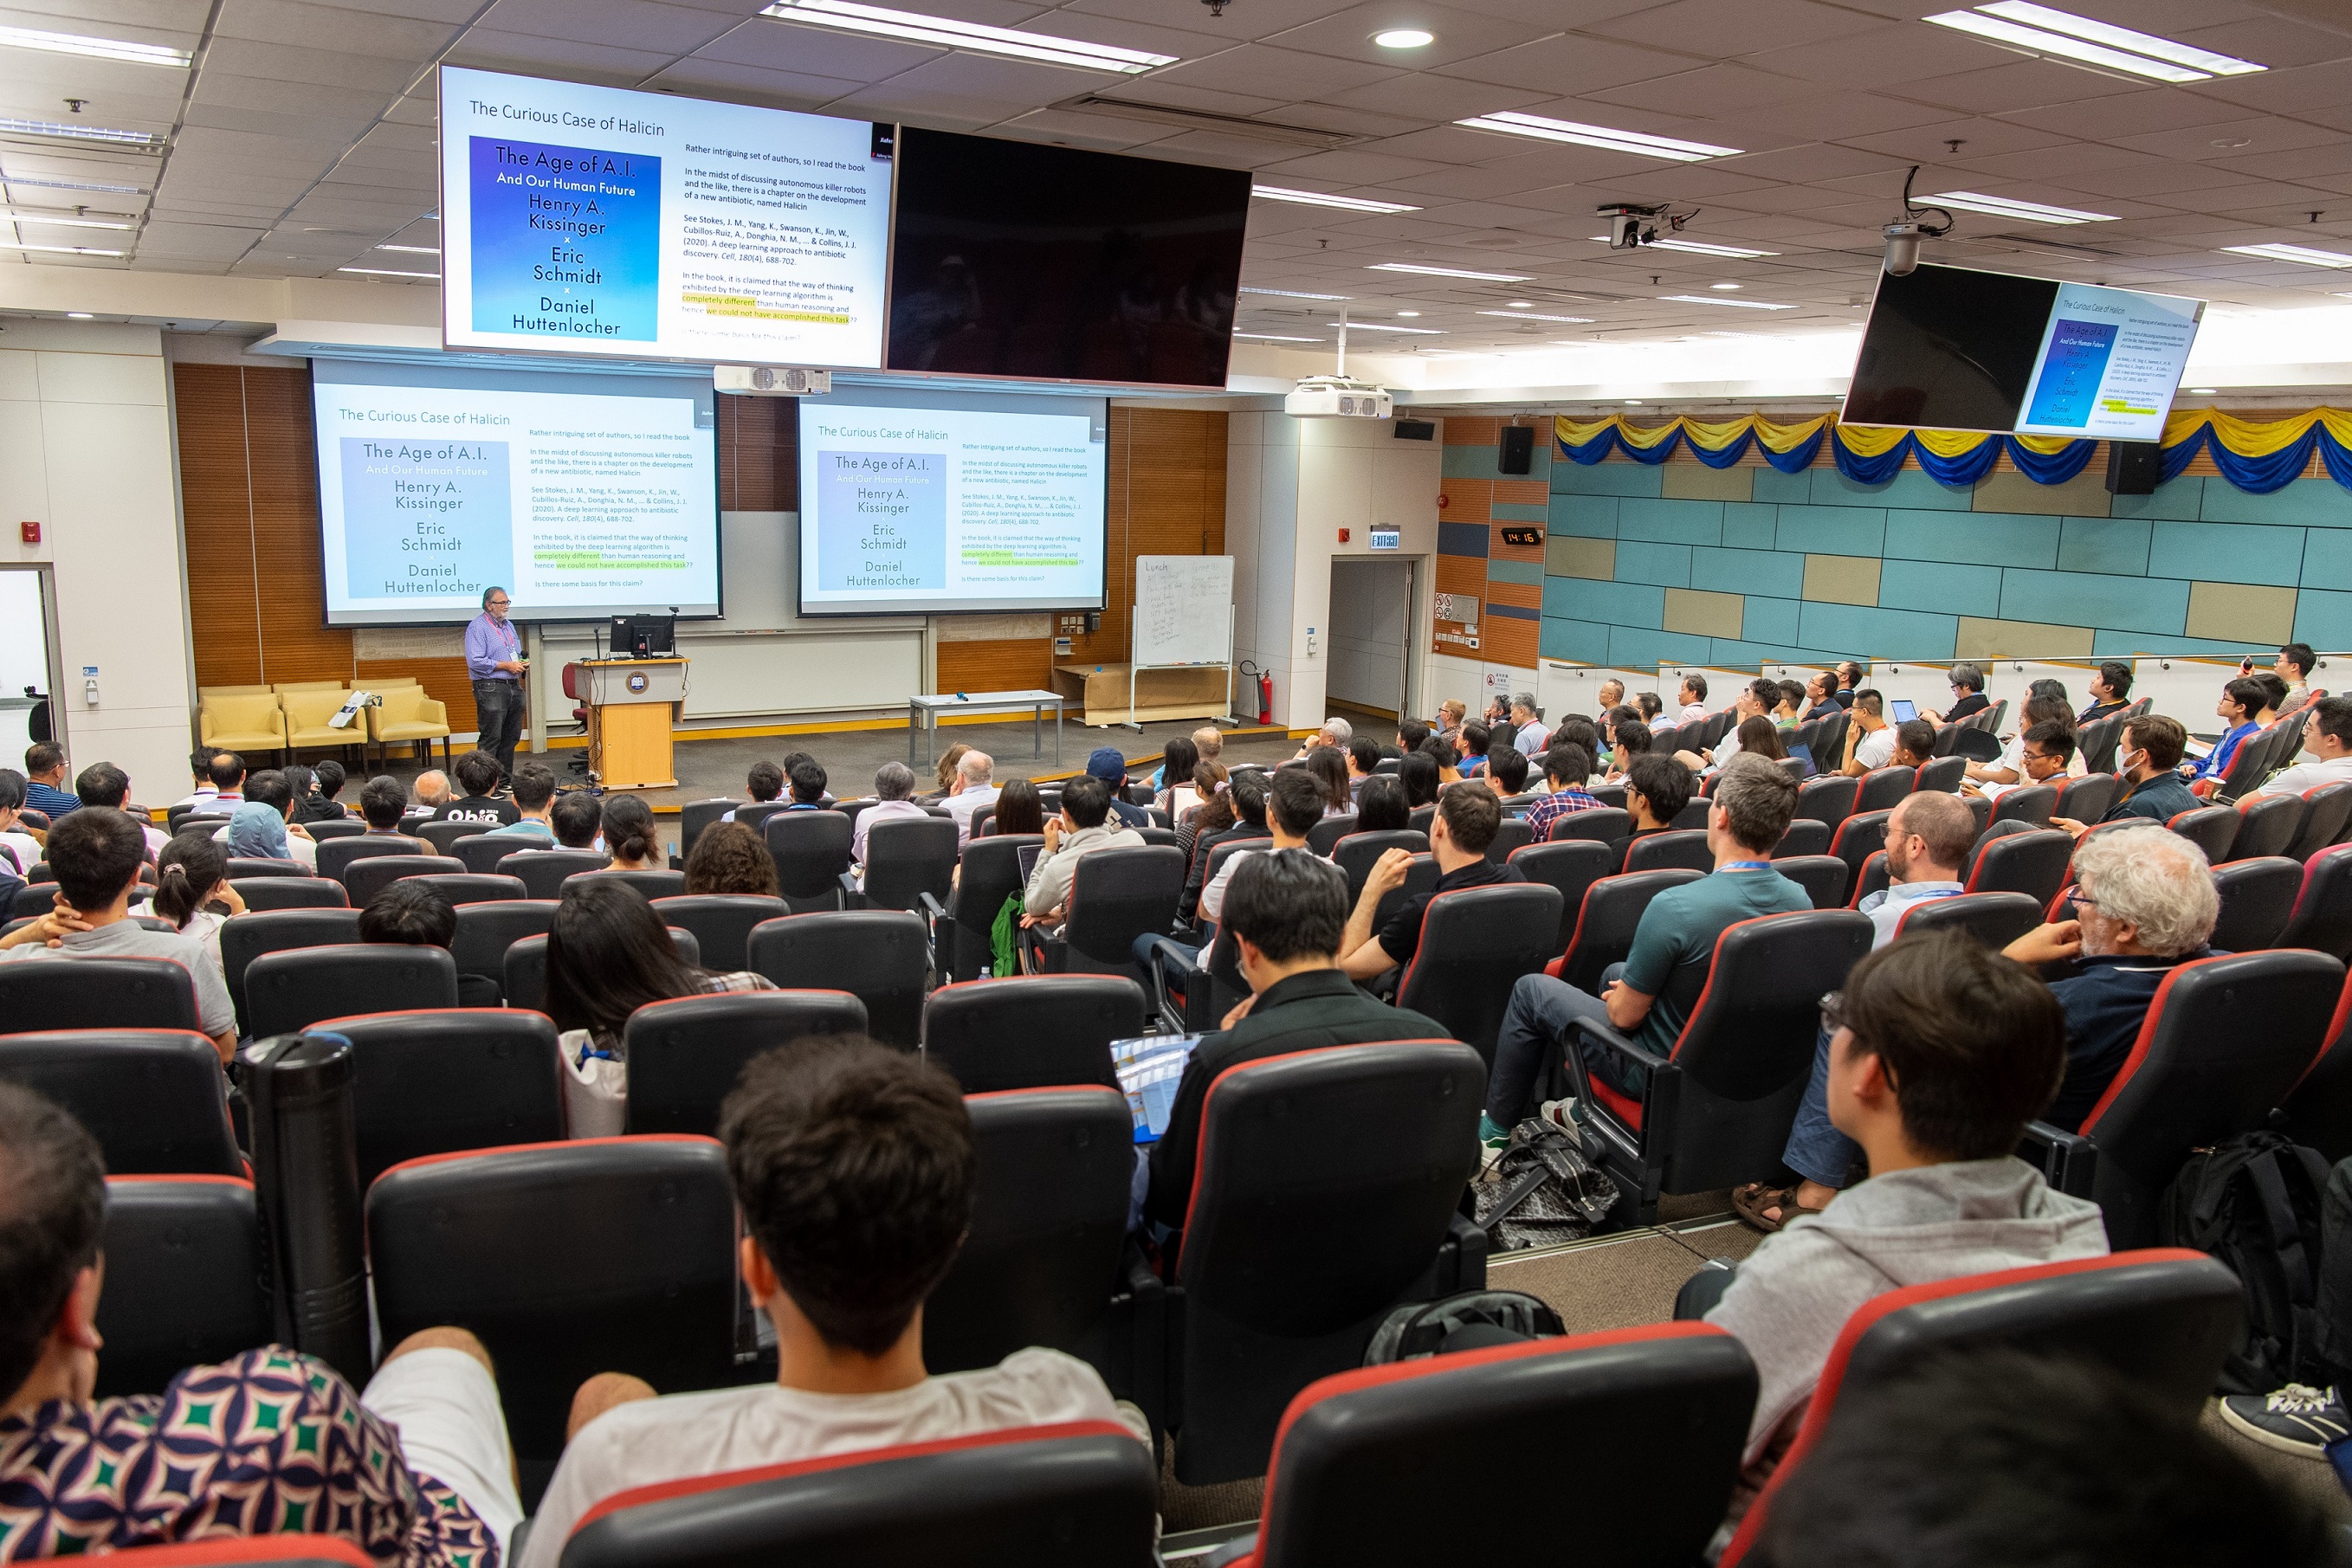 The satellite meeting of the IUPAP International Conference on Statistical Physics attracted more than 150 participants, with additional over 20,000 attendees joined virtually. 